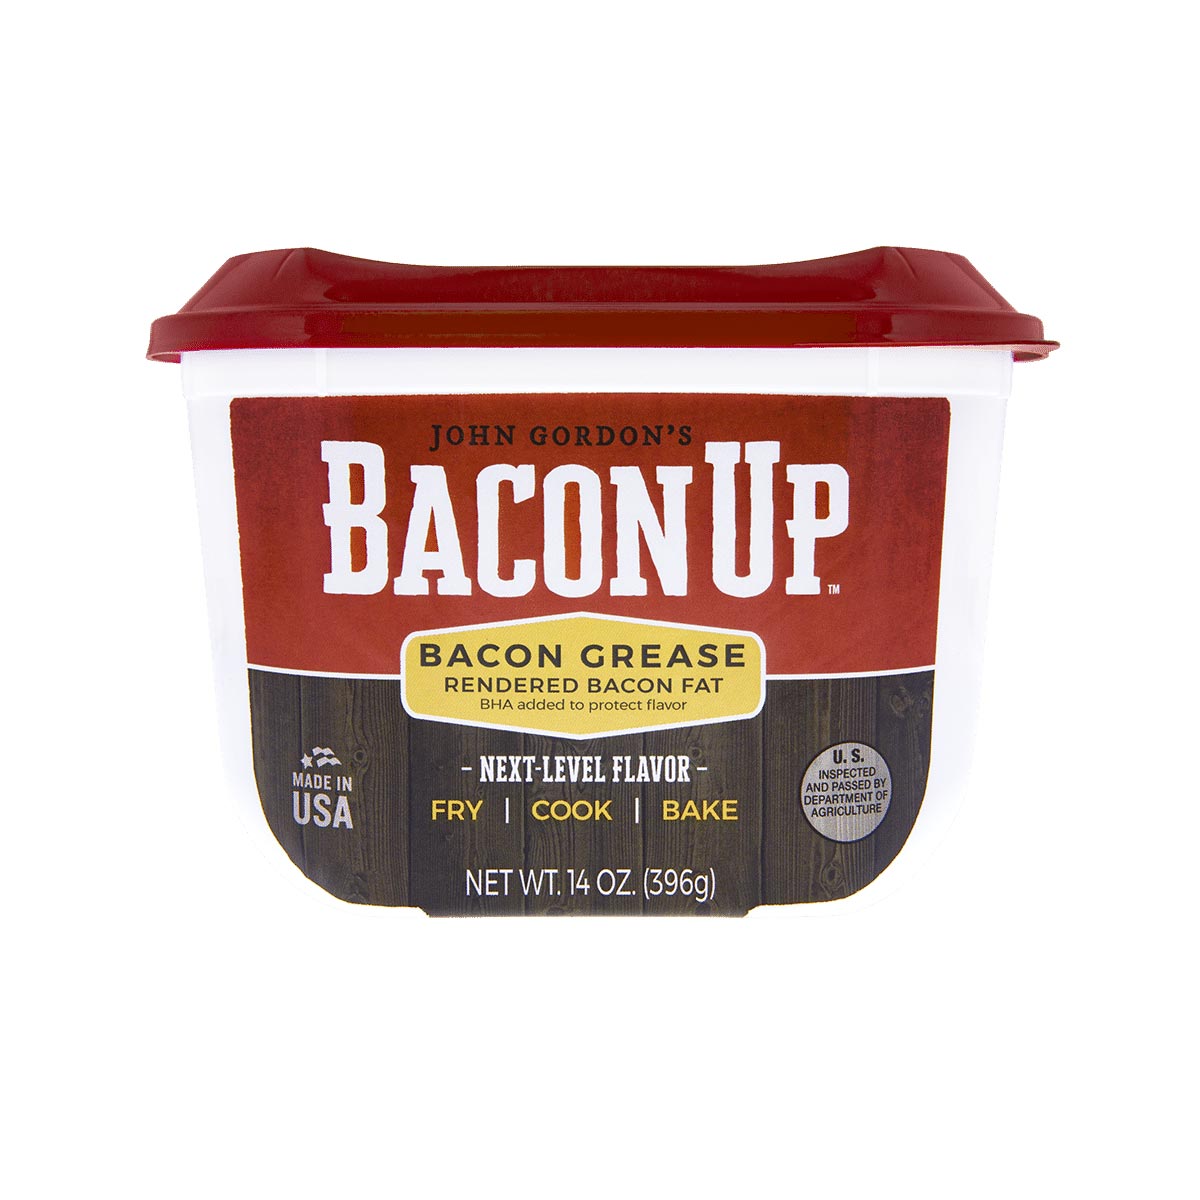 https://www.meadowcreekbbqsupply.com/wp-content/uploads/2021/08/Bacon_Up_Bacon_Grease_BAC_14oz_Front.jpg